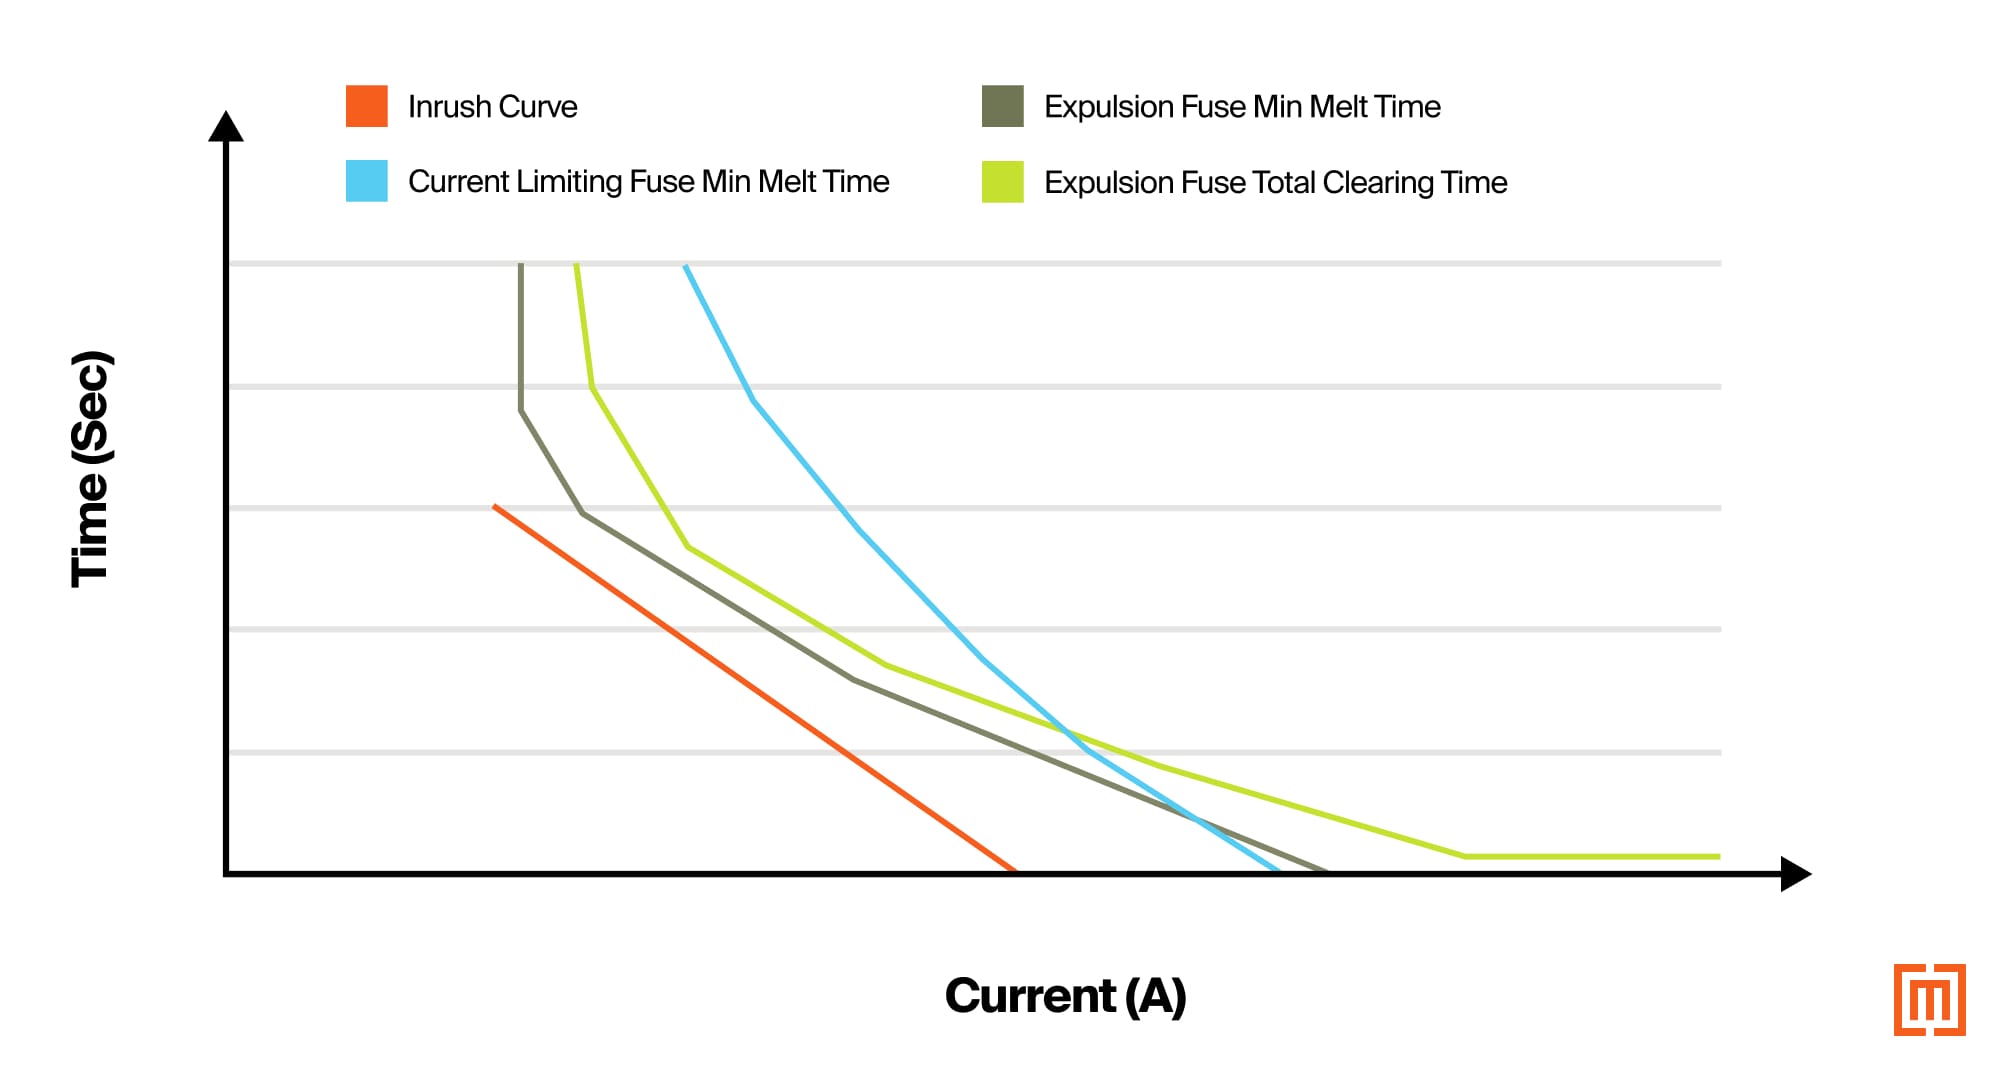 A graph showing the inrush curve of a transformer versus the melting points of expulsion fuses and current limiting fuses